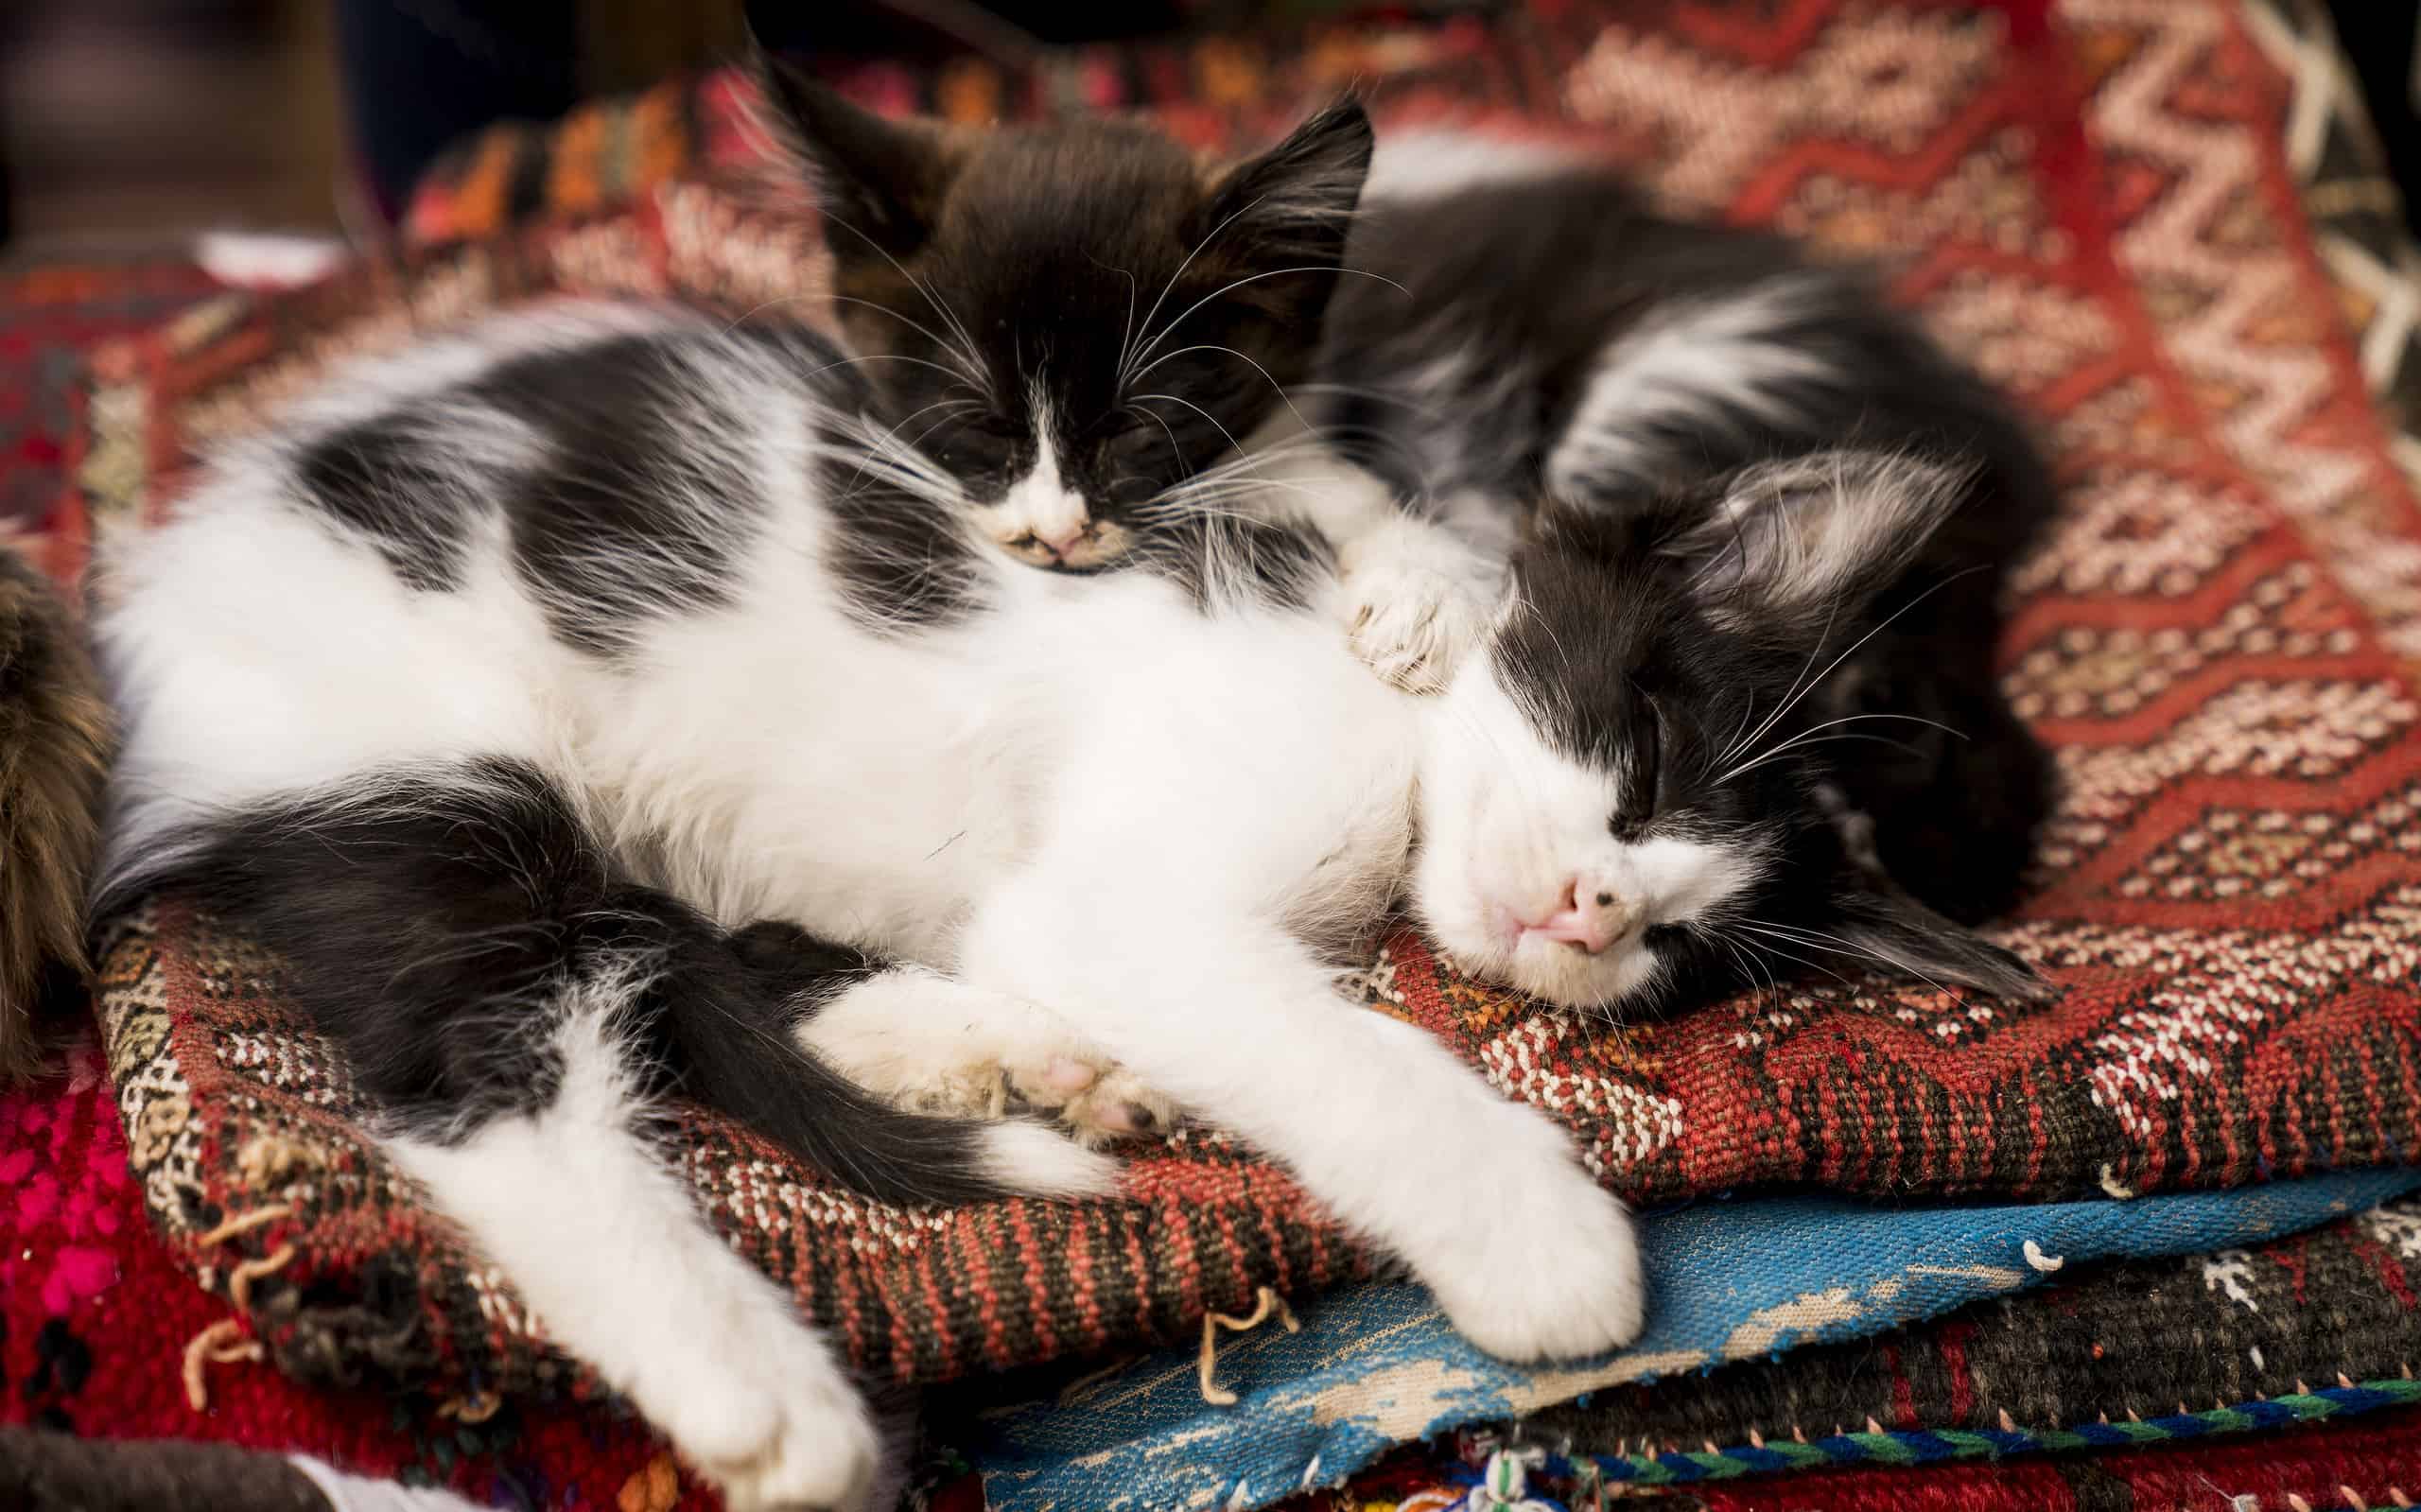 Two polydactyl kittens sleep together